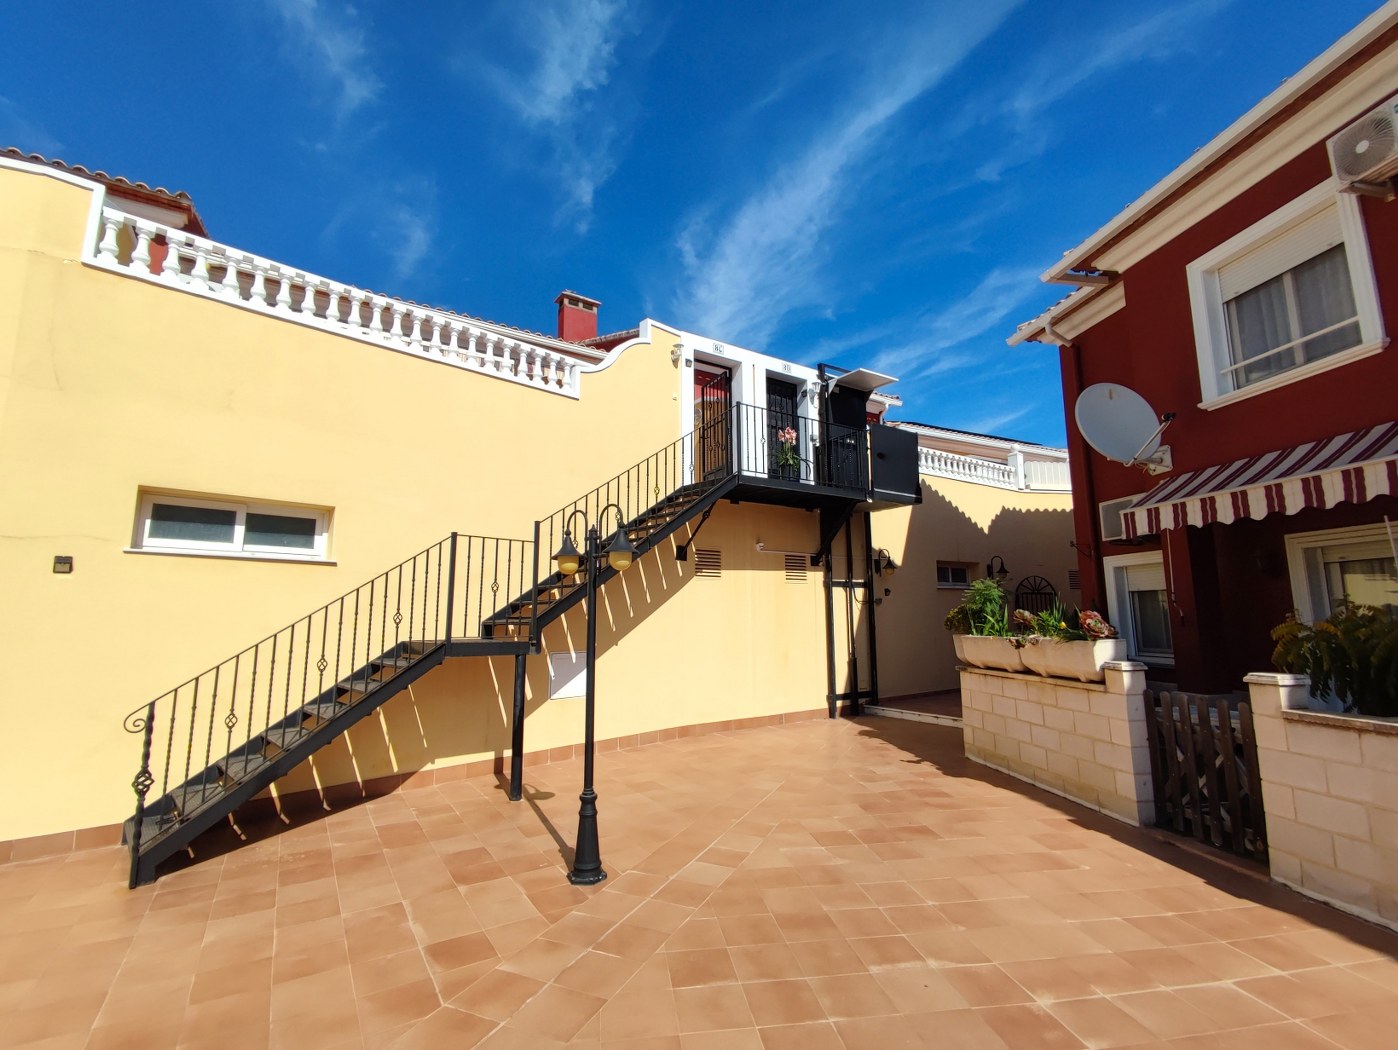 Sunny apartment with 3 bedrooms and communal pool in Els Poblets, Costa Blanca